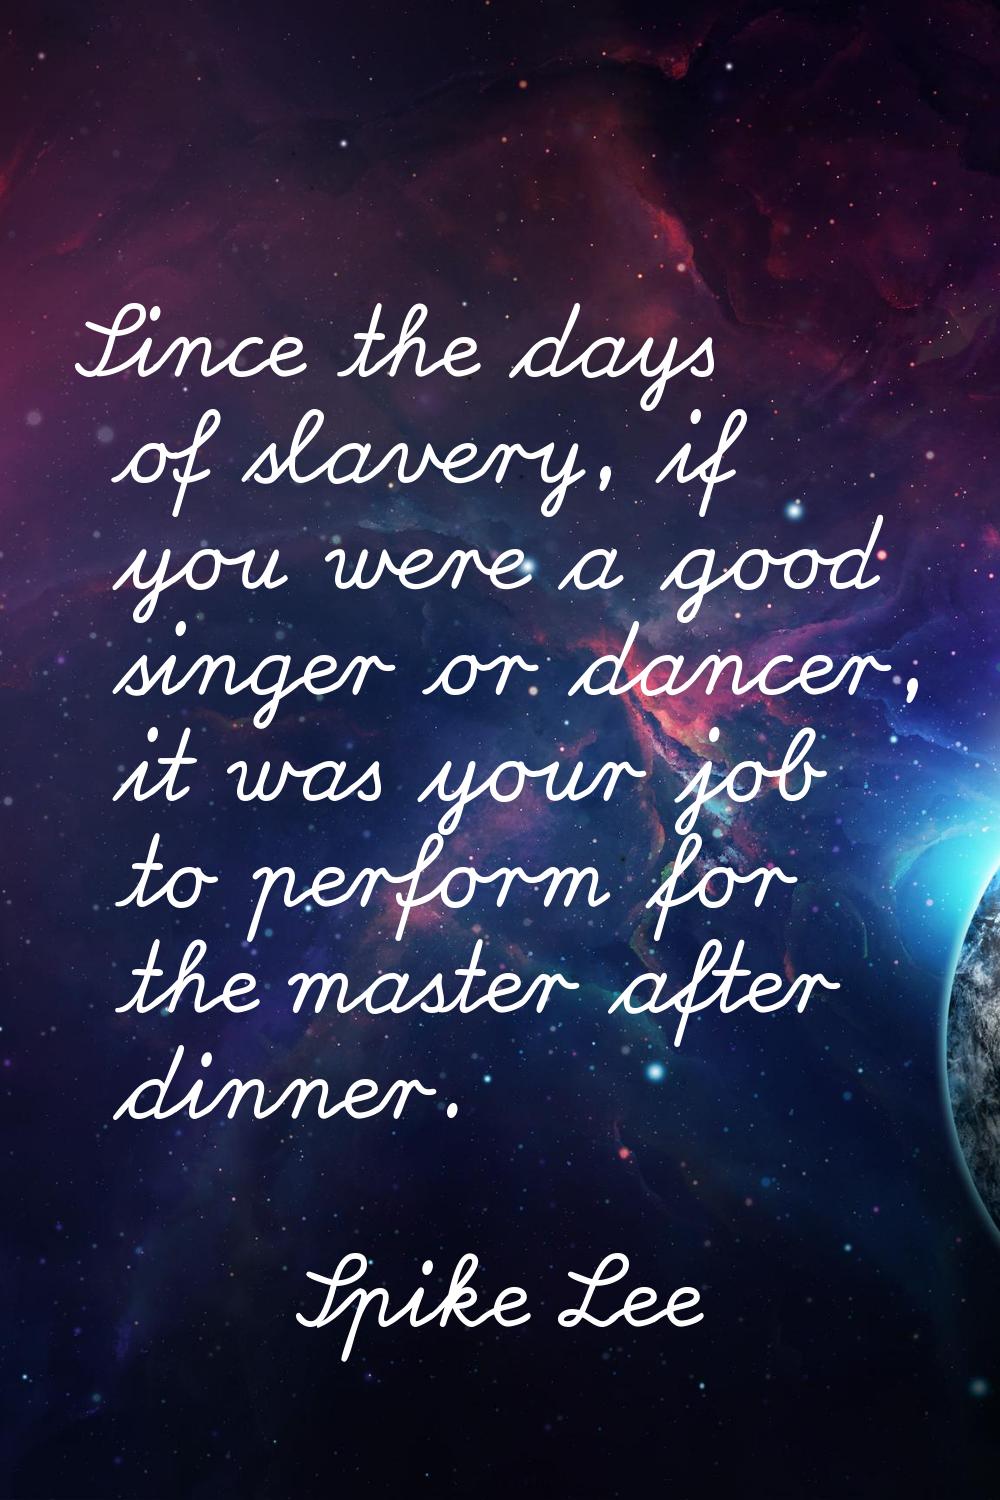 Since the days of slavery, if you were a good singer or dancer, it was your job to perform for the 